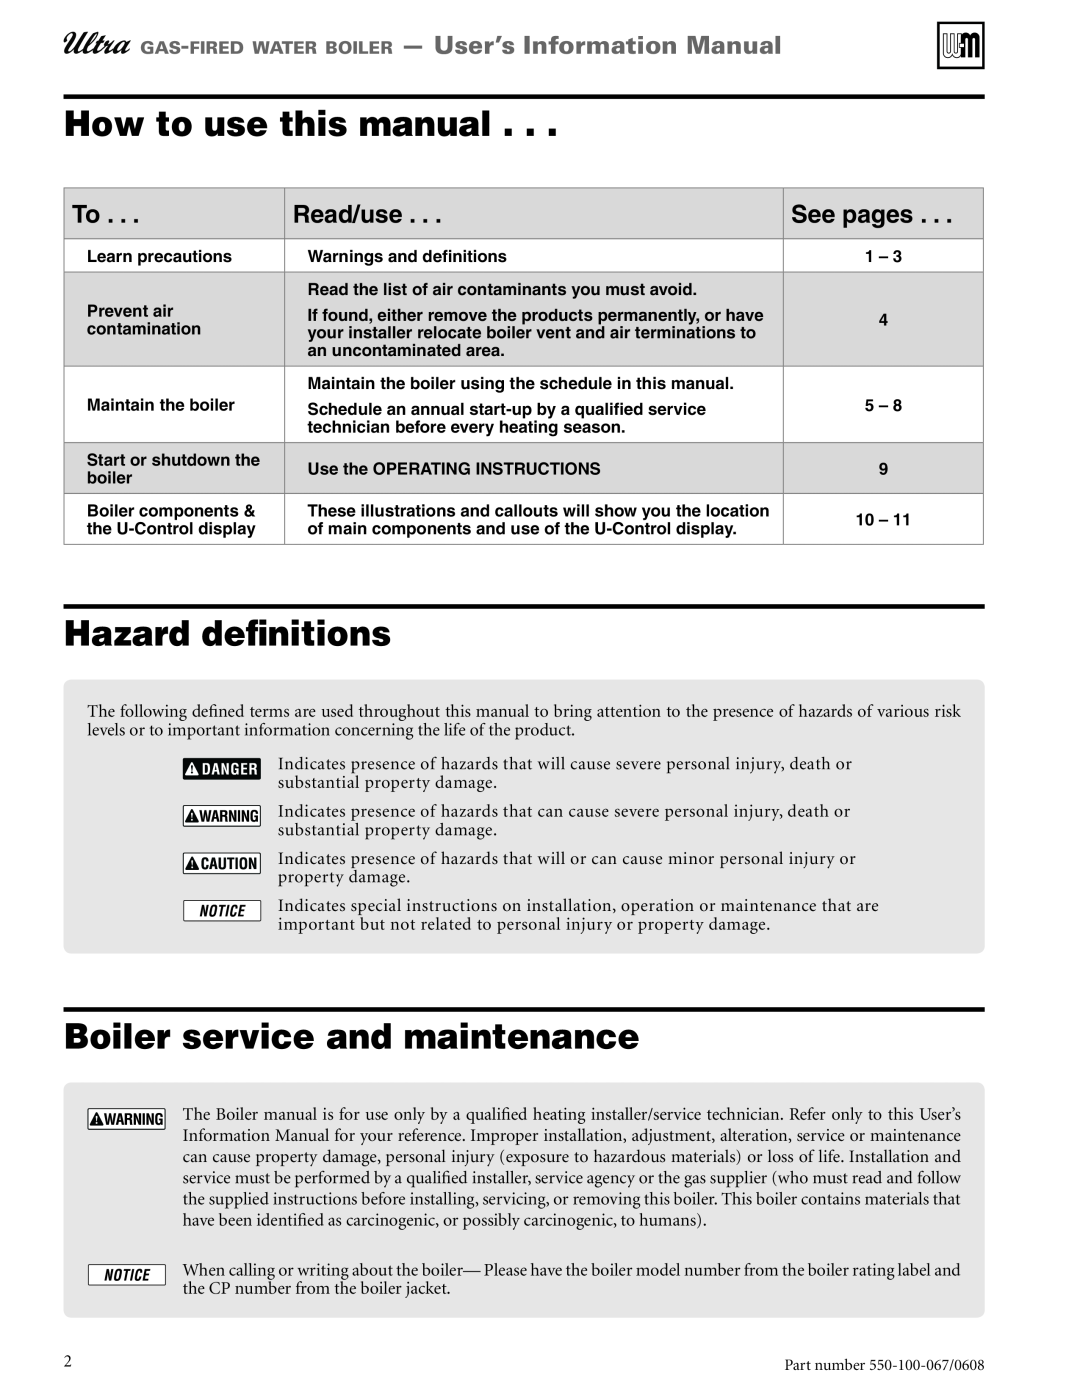 Weil-McLain 550-100-067/0608 How to use this manual, Hazard definitions, Boiler service and maintenance, Read/use 